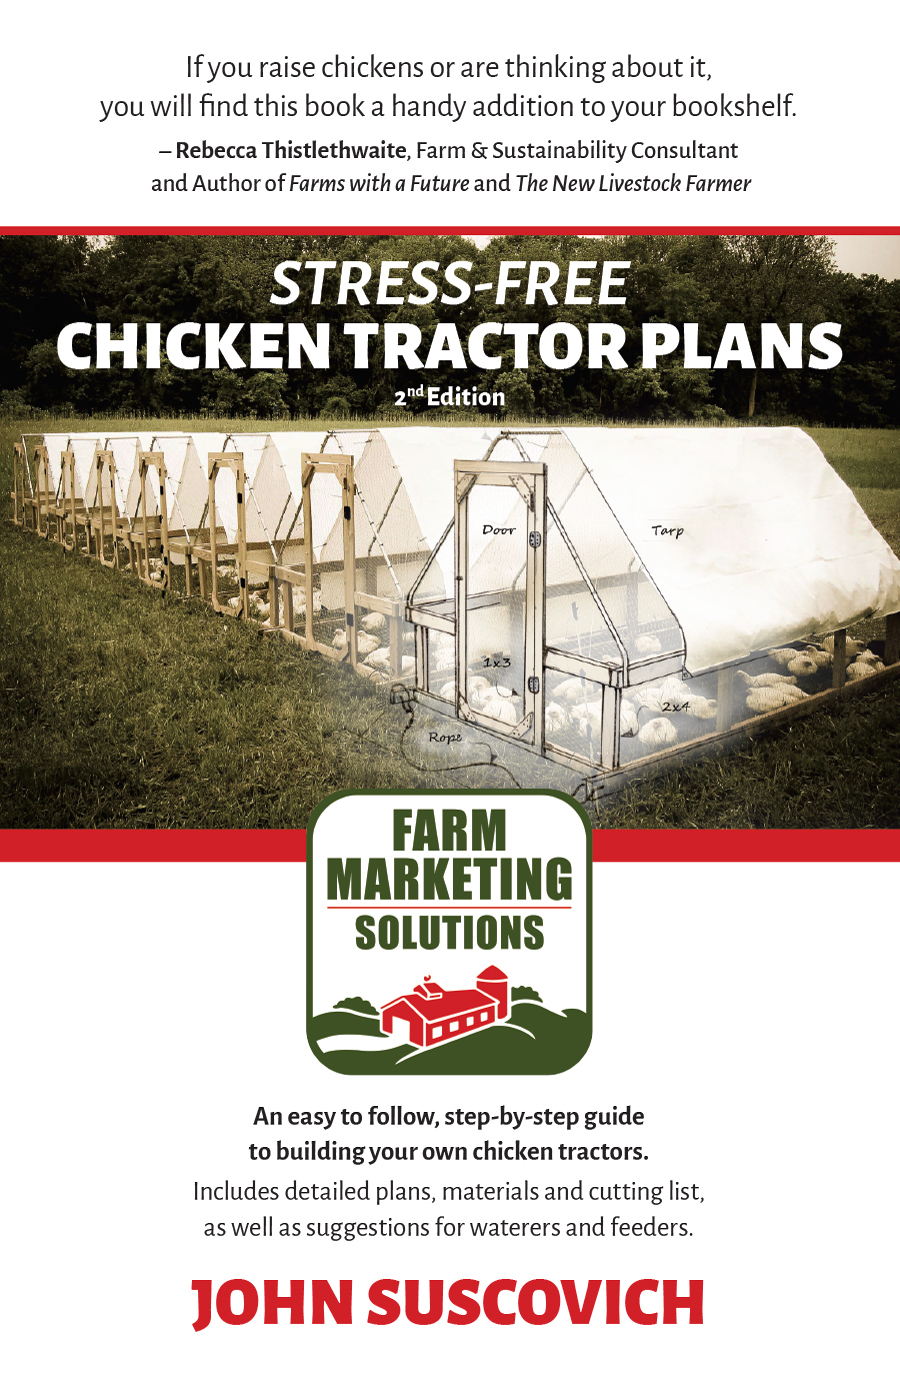 cover image - stress free chicken tractor